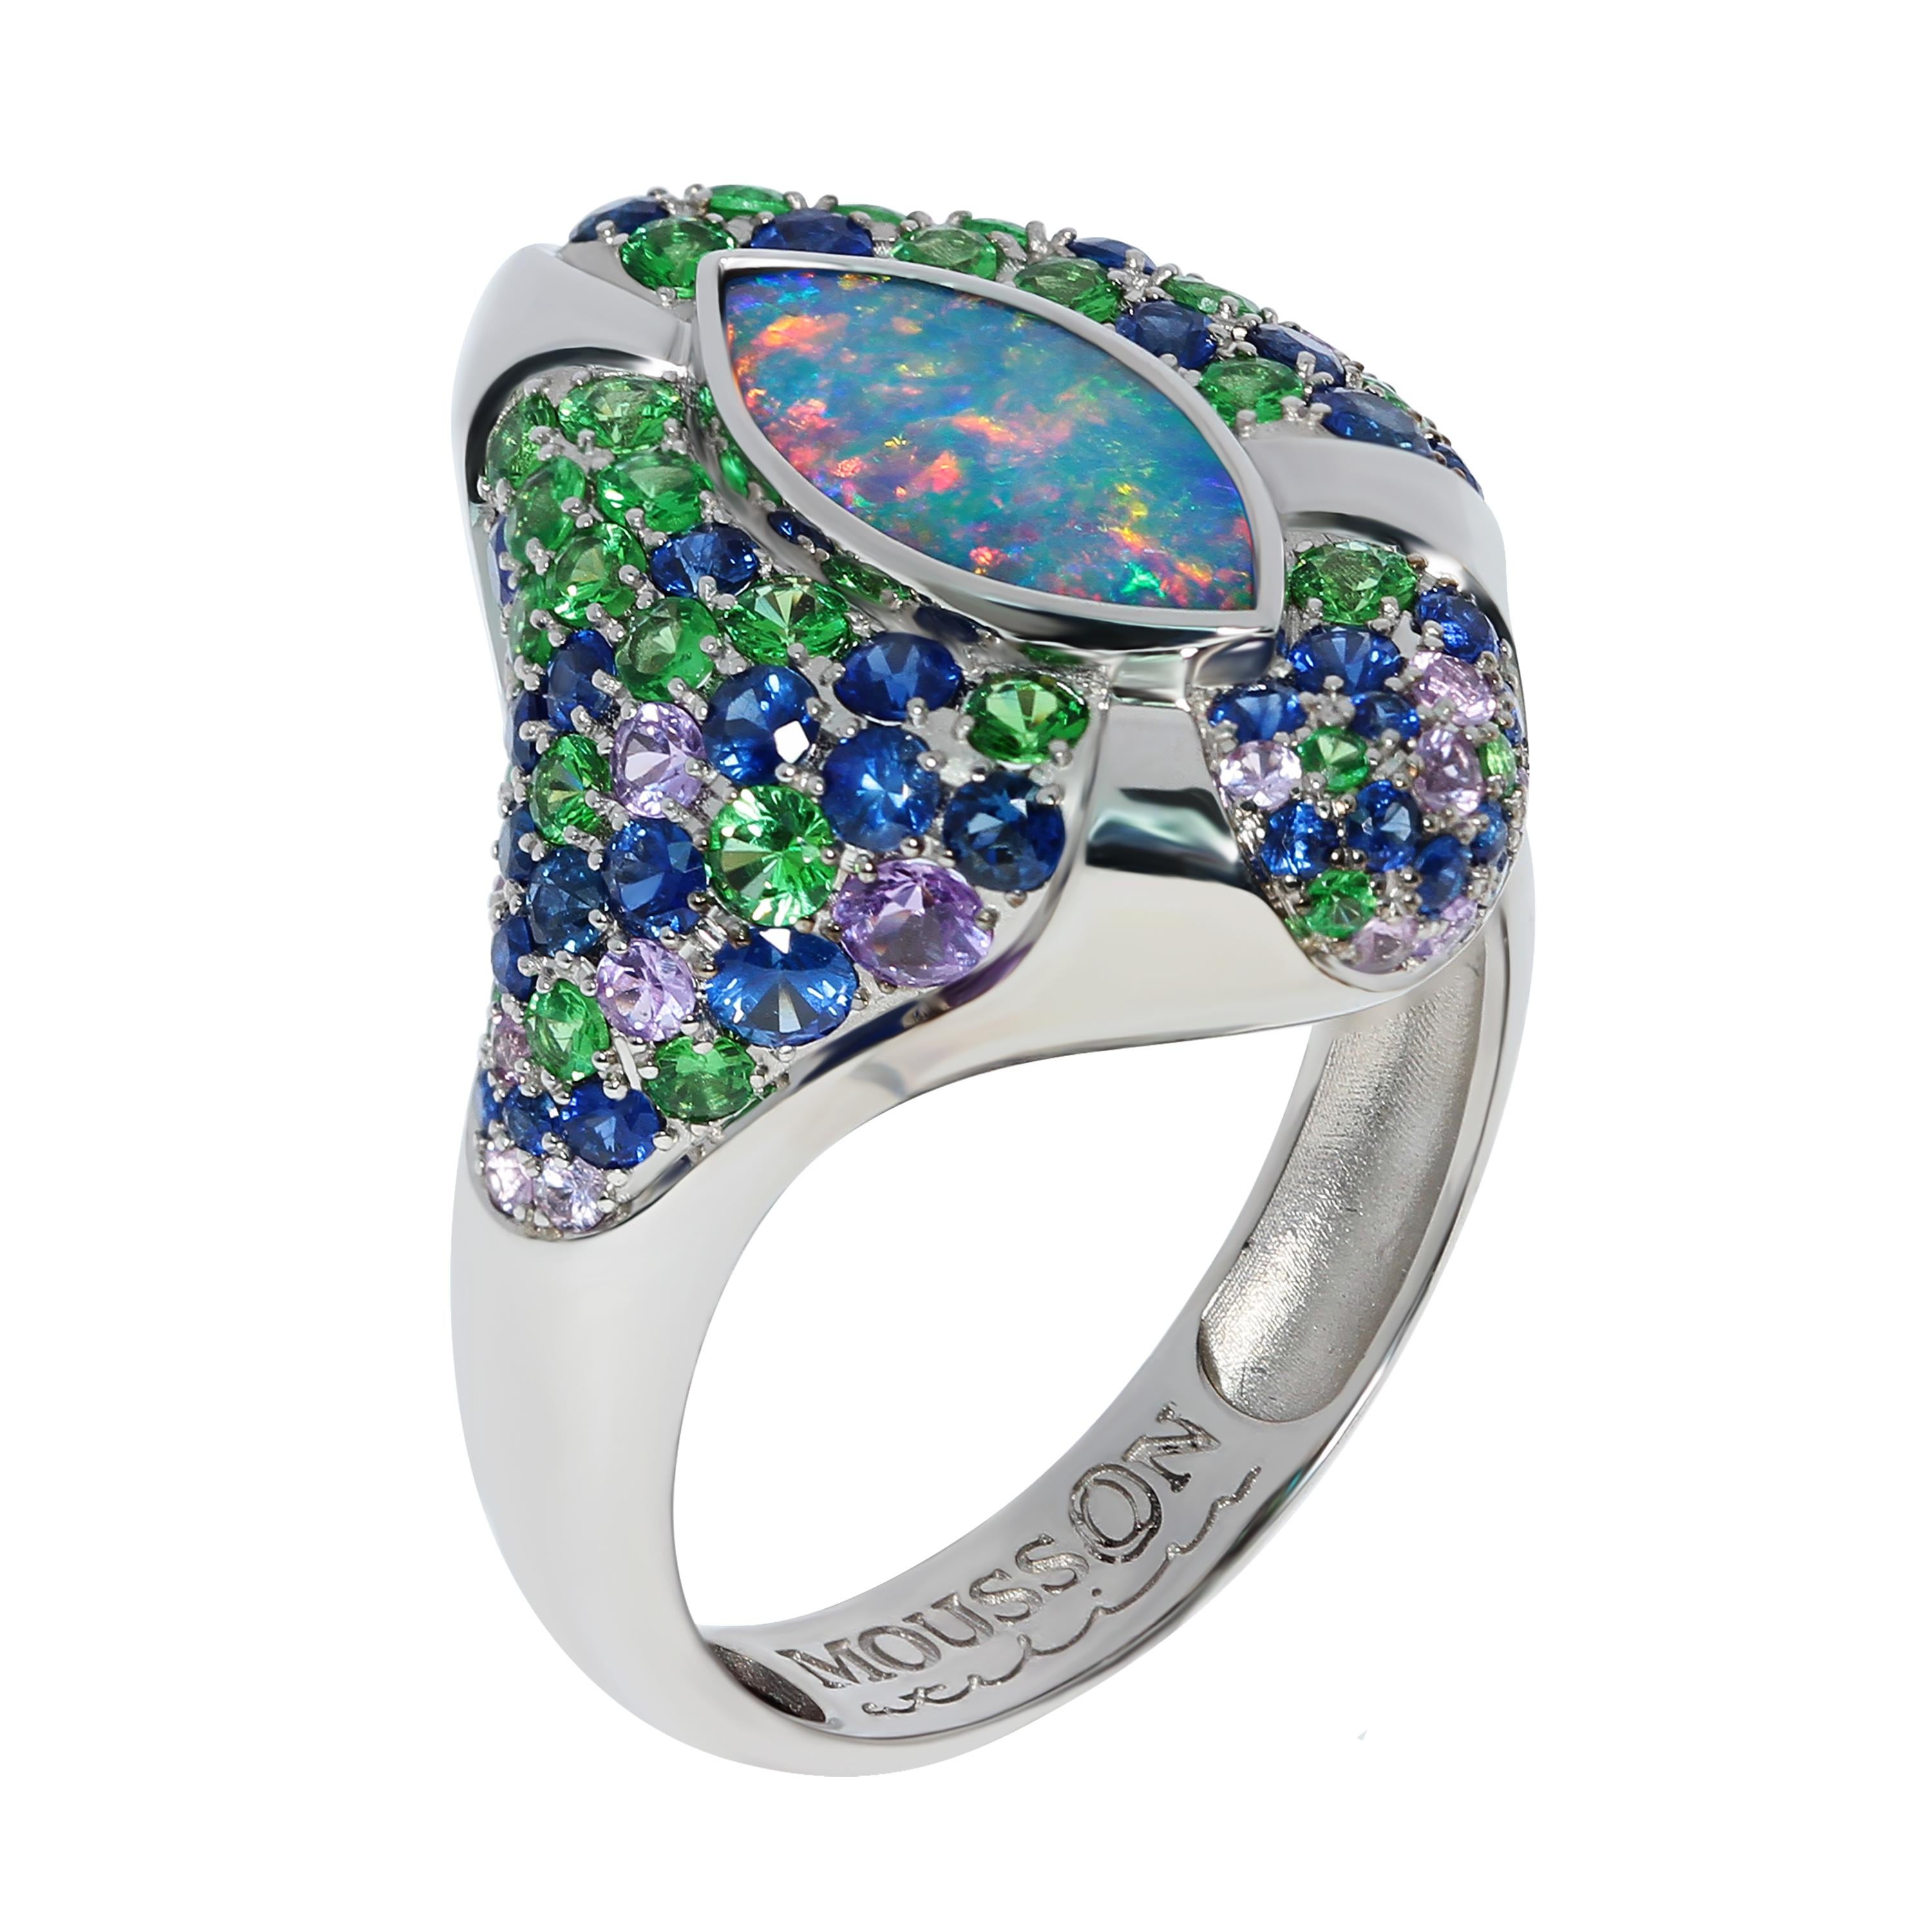 Opal 1.42 Carat Blue Purple Sapphires Tsavorite White 18 Karat Gold Riviera Ring
The name and the variety of colours in this collection are associated with the bright Italian and French Riviera, vivid and colourful houses and sun reflections on the